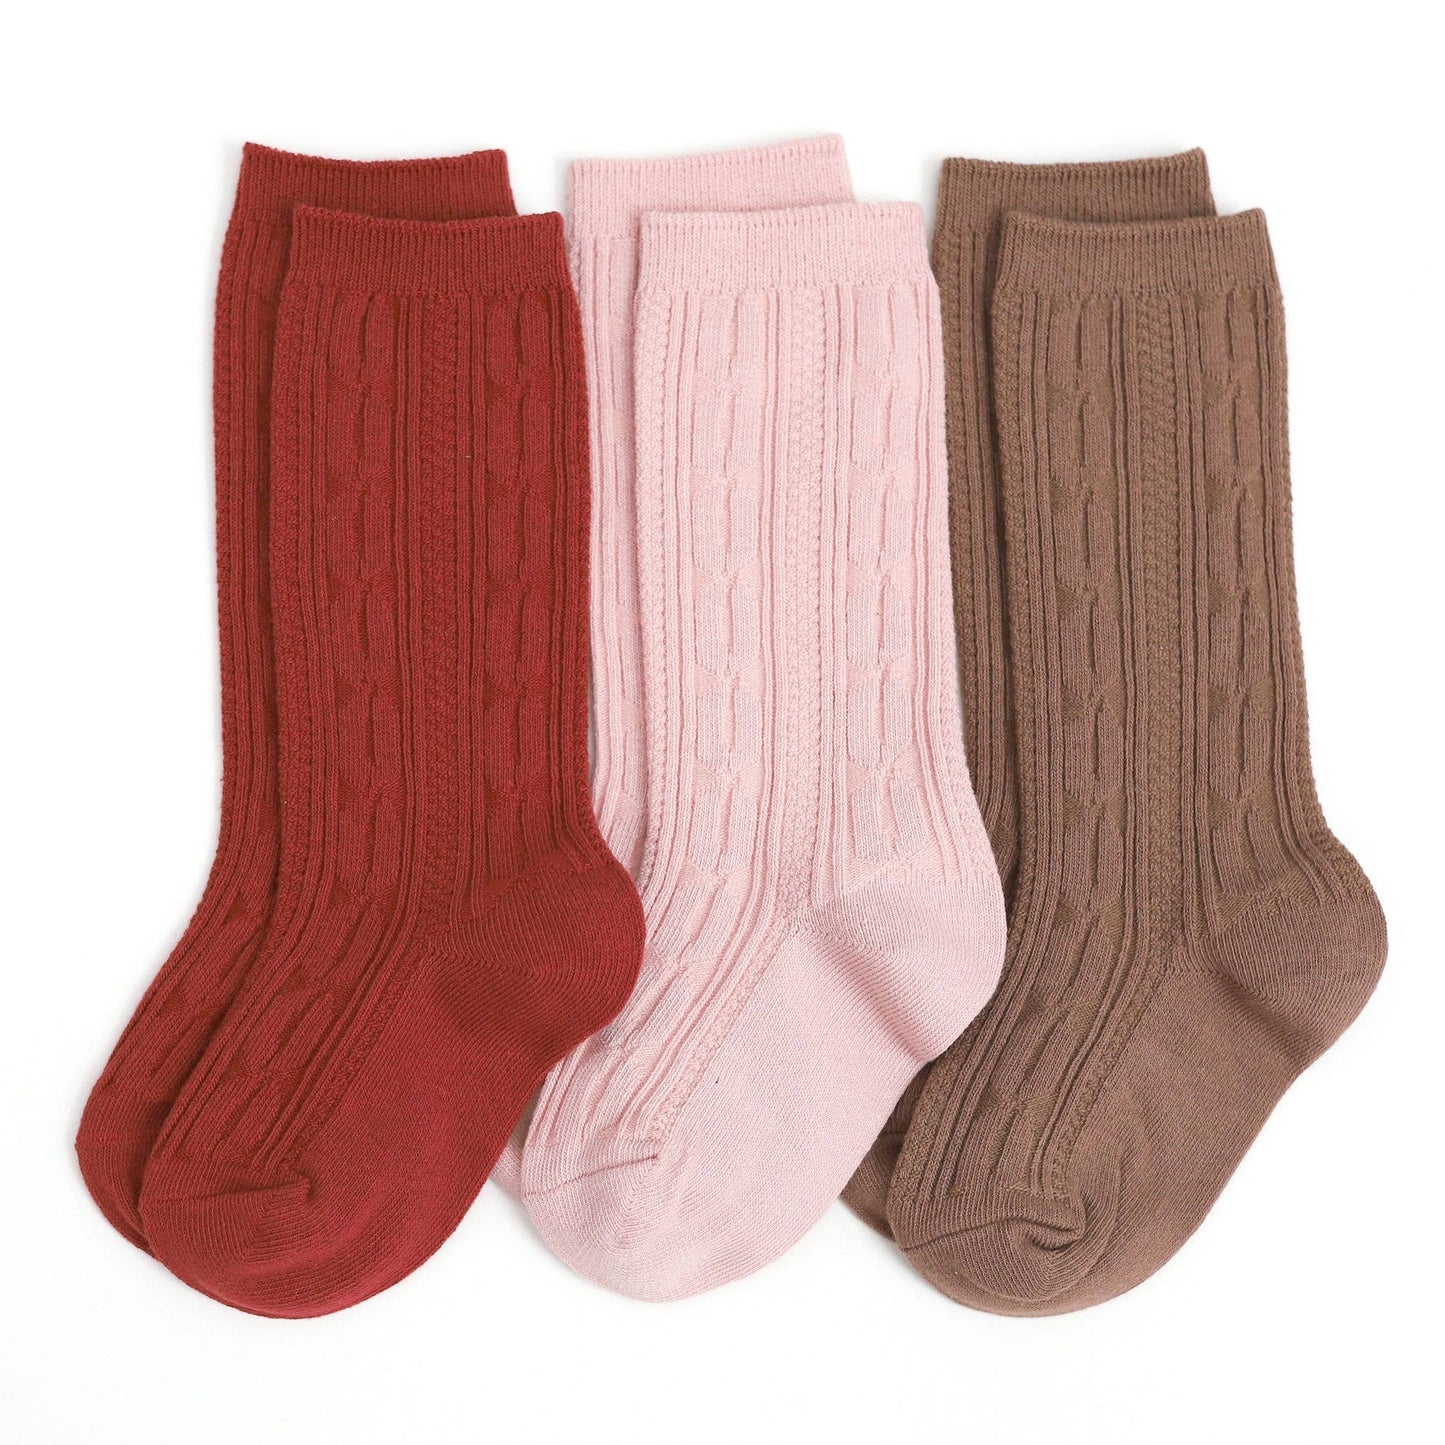 Little Stocking Co. - Sequoia Cable Knit Knee High Sock 3-Pack: 6-18 MONTHS